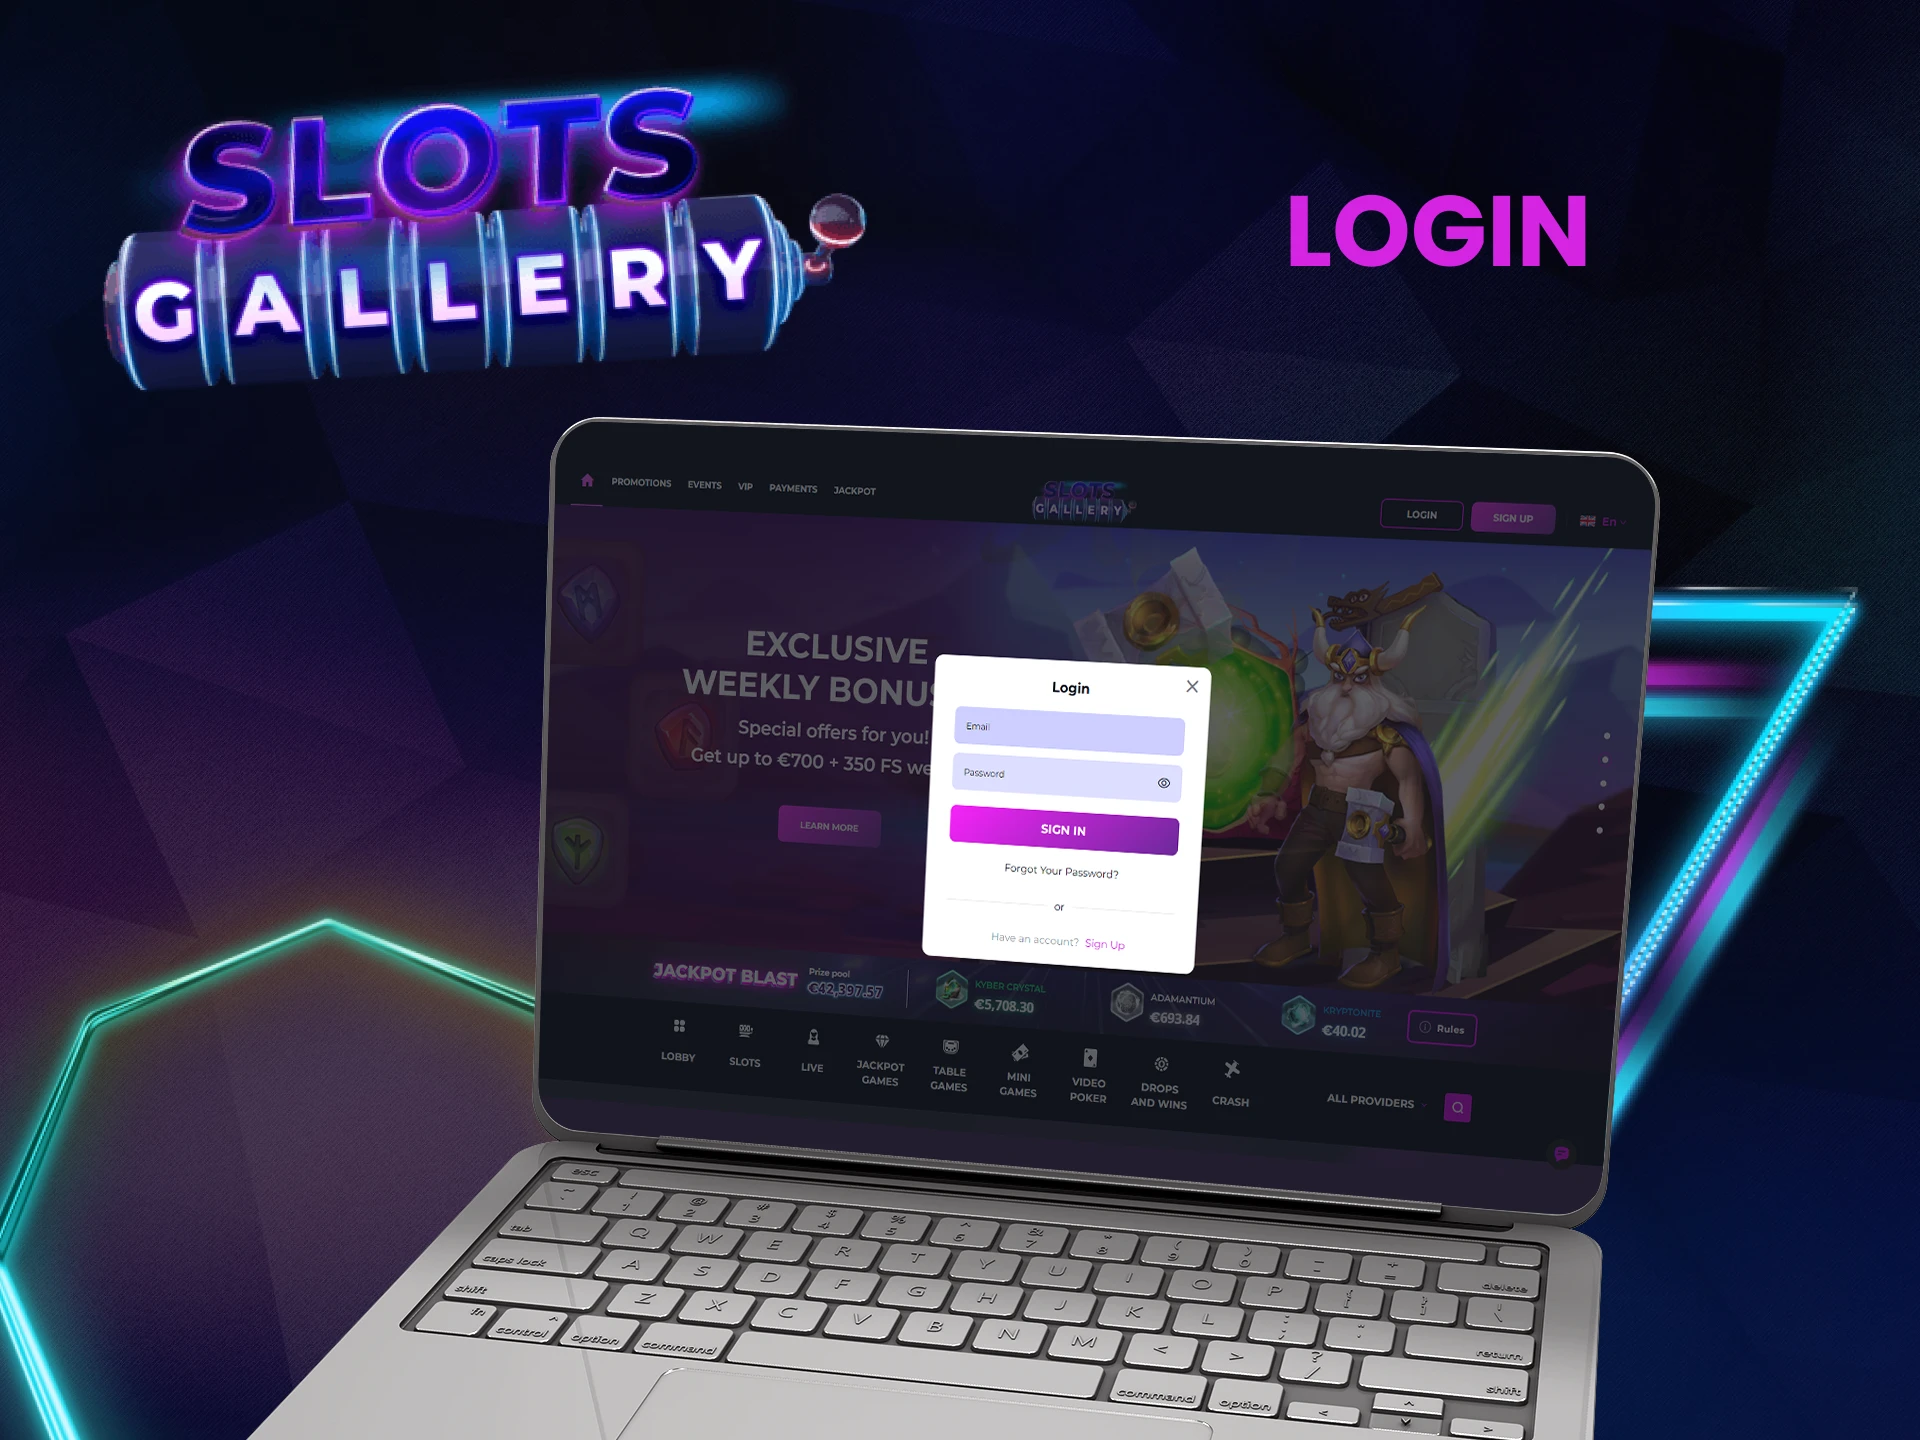 Log in to your personal account on the Slots Gallery website.